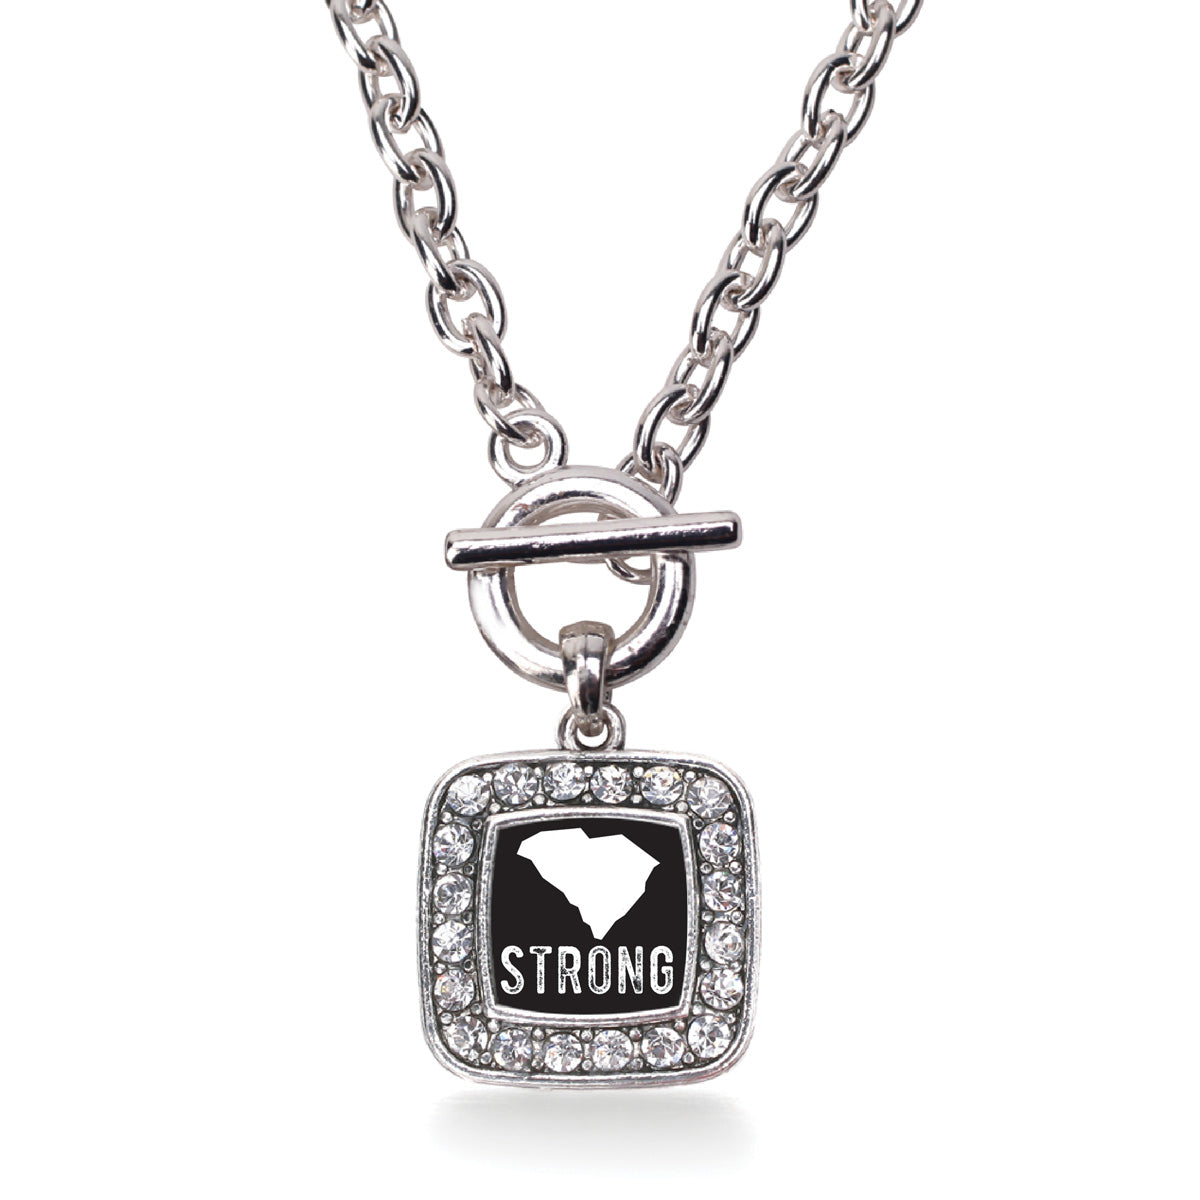 Silver South Carolina Strong Square Charm Toggle Necklace